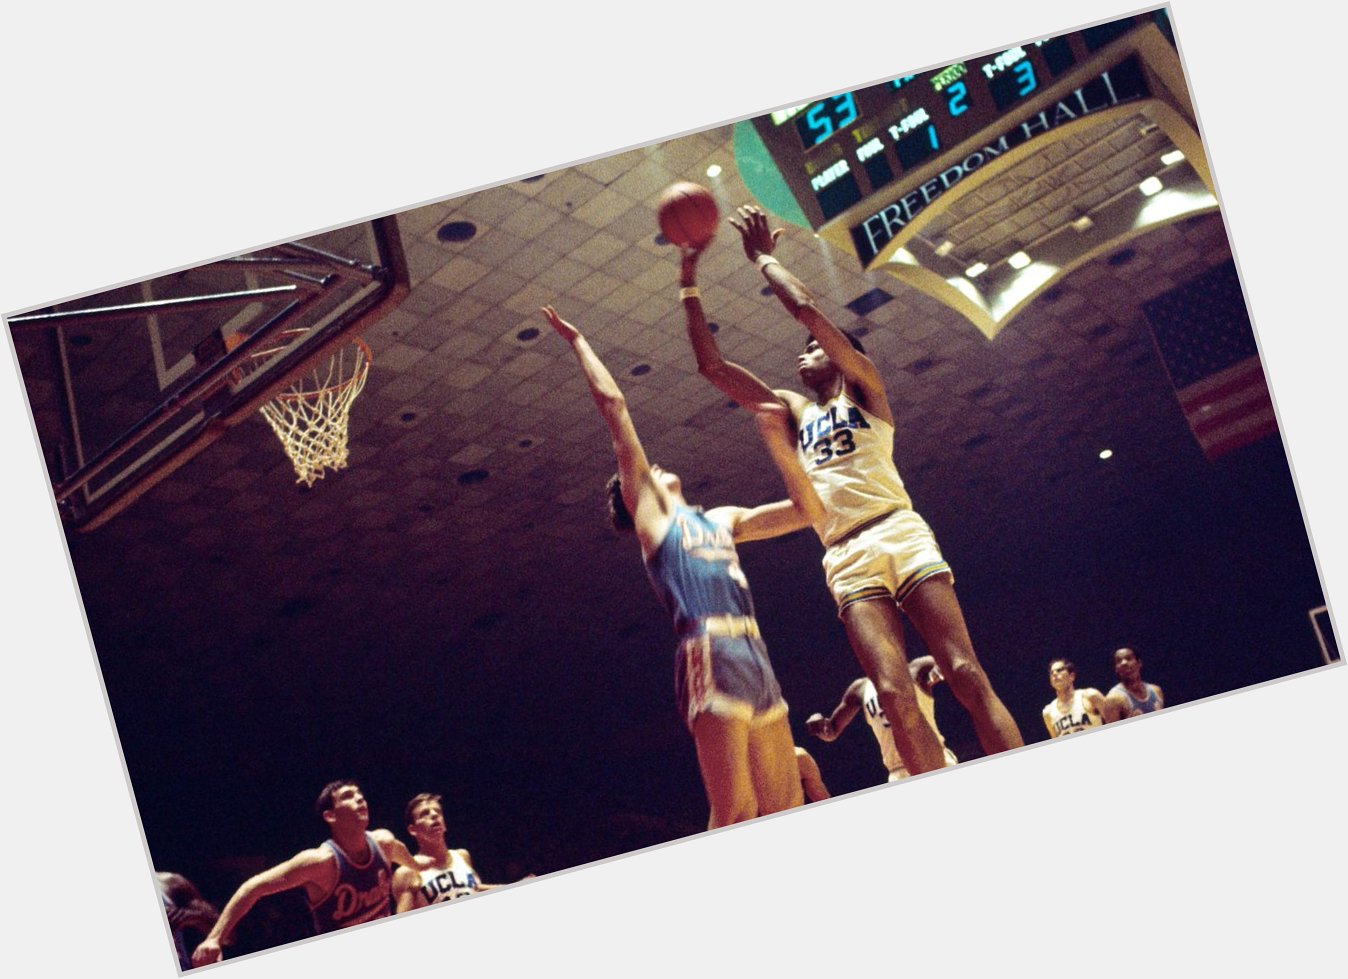 We\d like to wish a very HAPPY BIRTHDAY to one of UCLA\s all-time greats, Kareem Abdul-Jabbar ( 